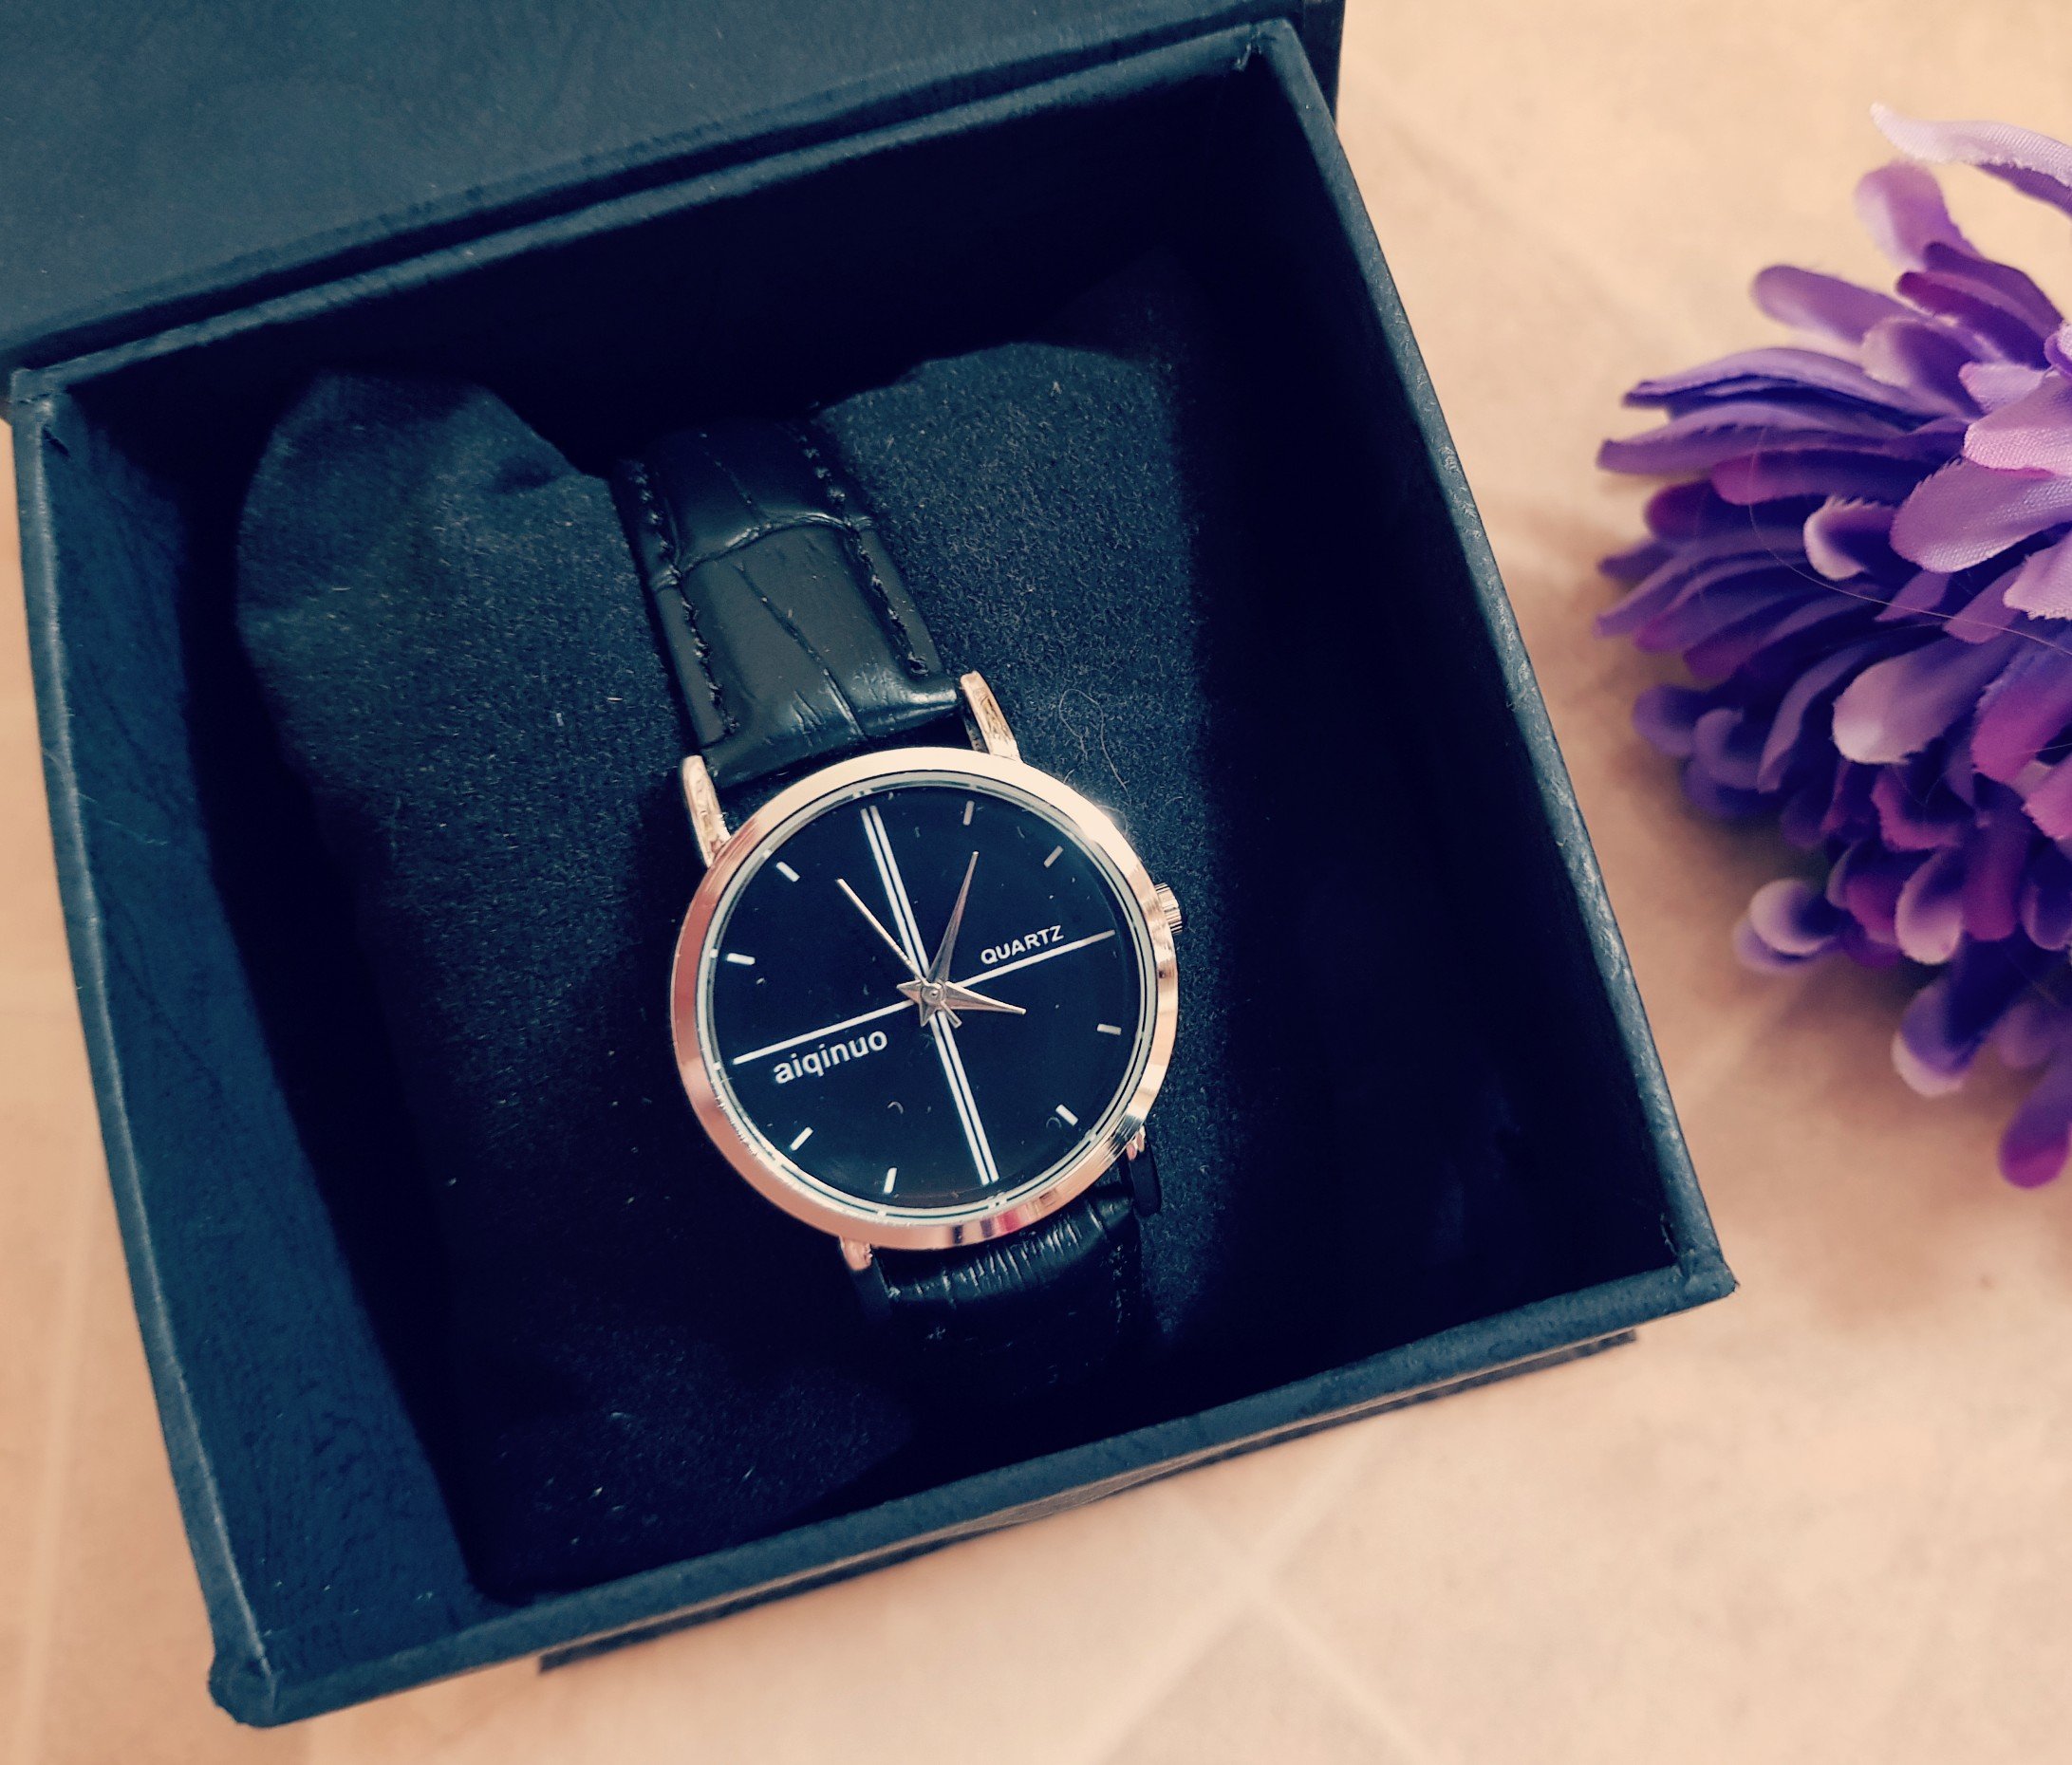 Ladies watch from GiftsOnline4U in box